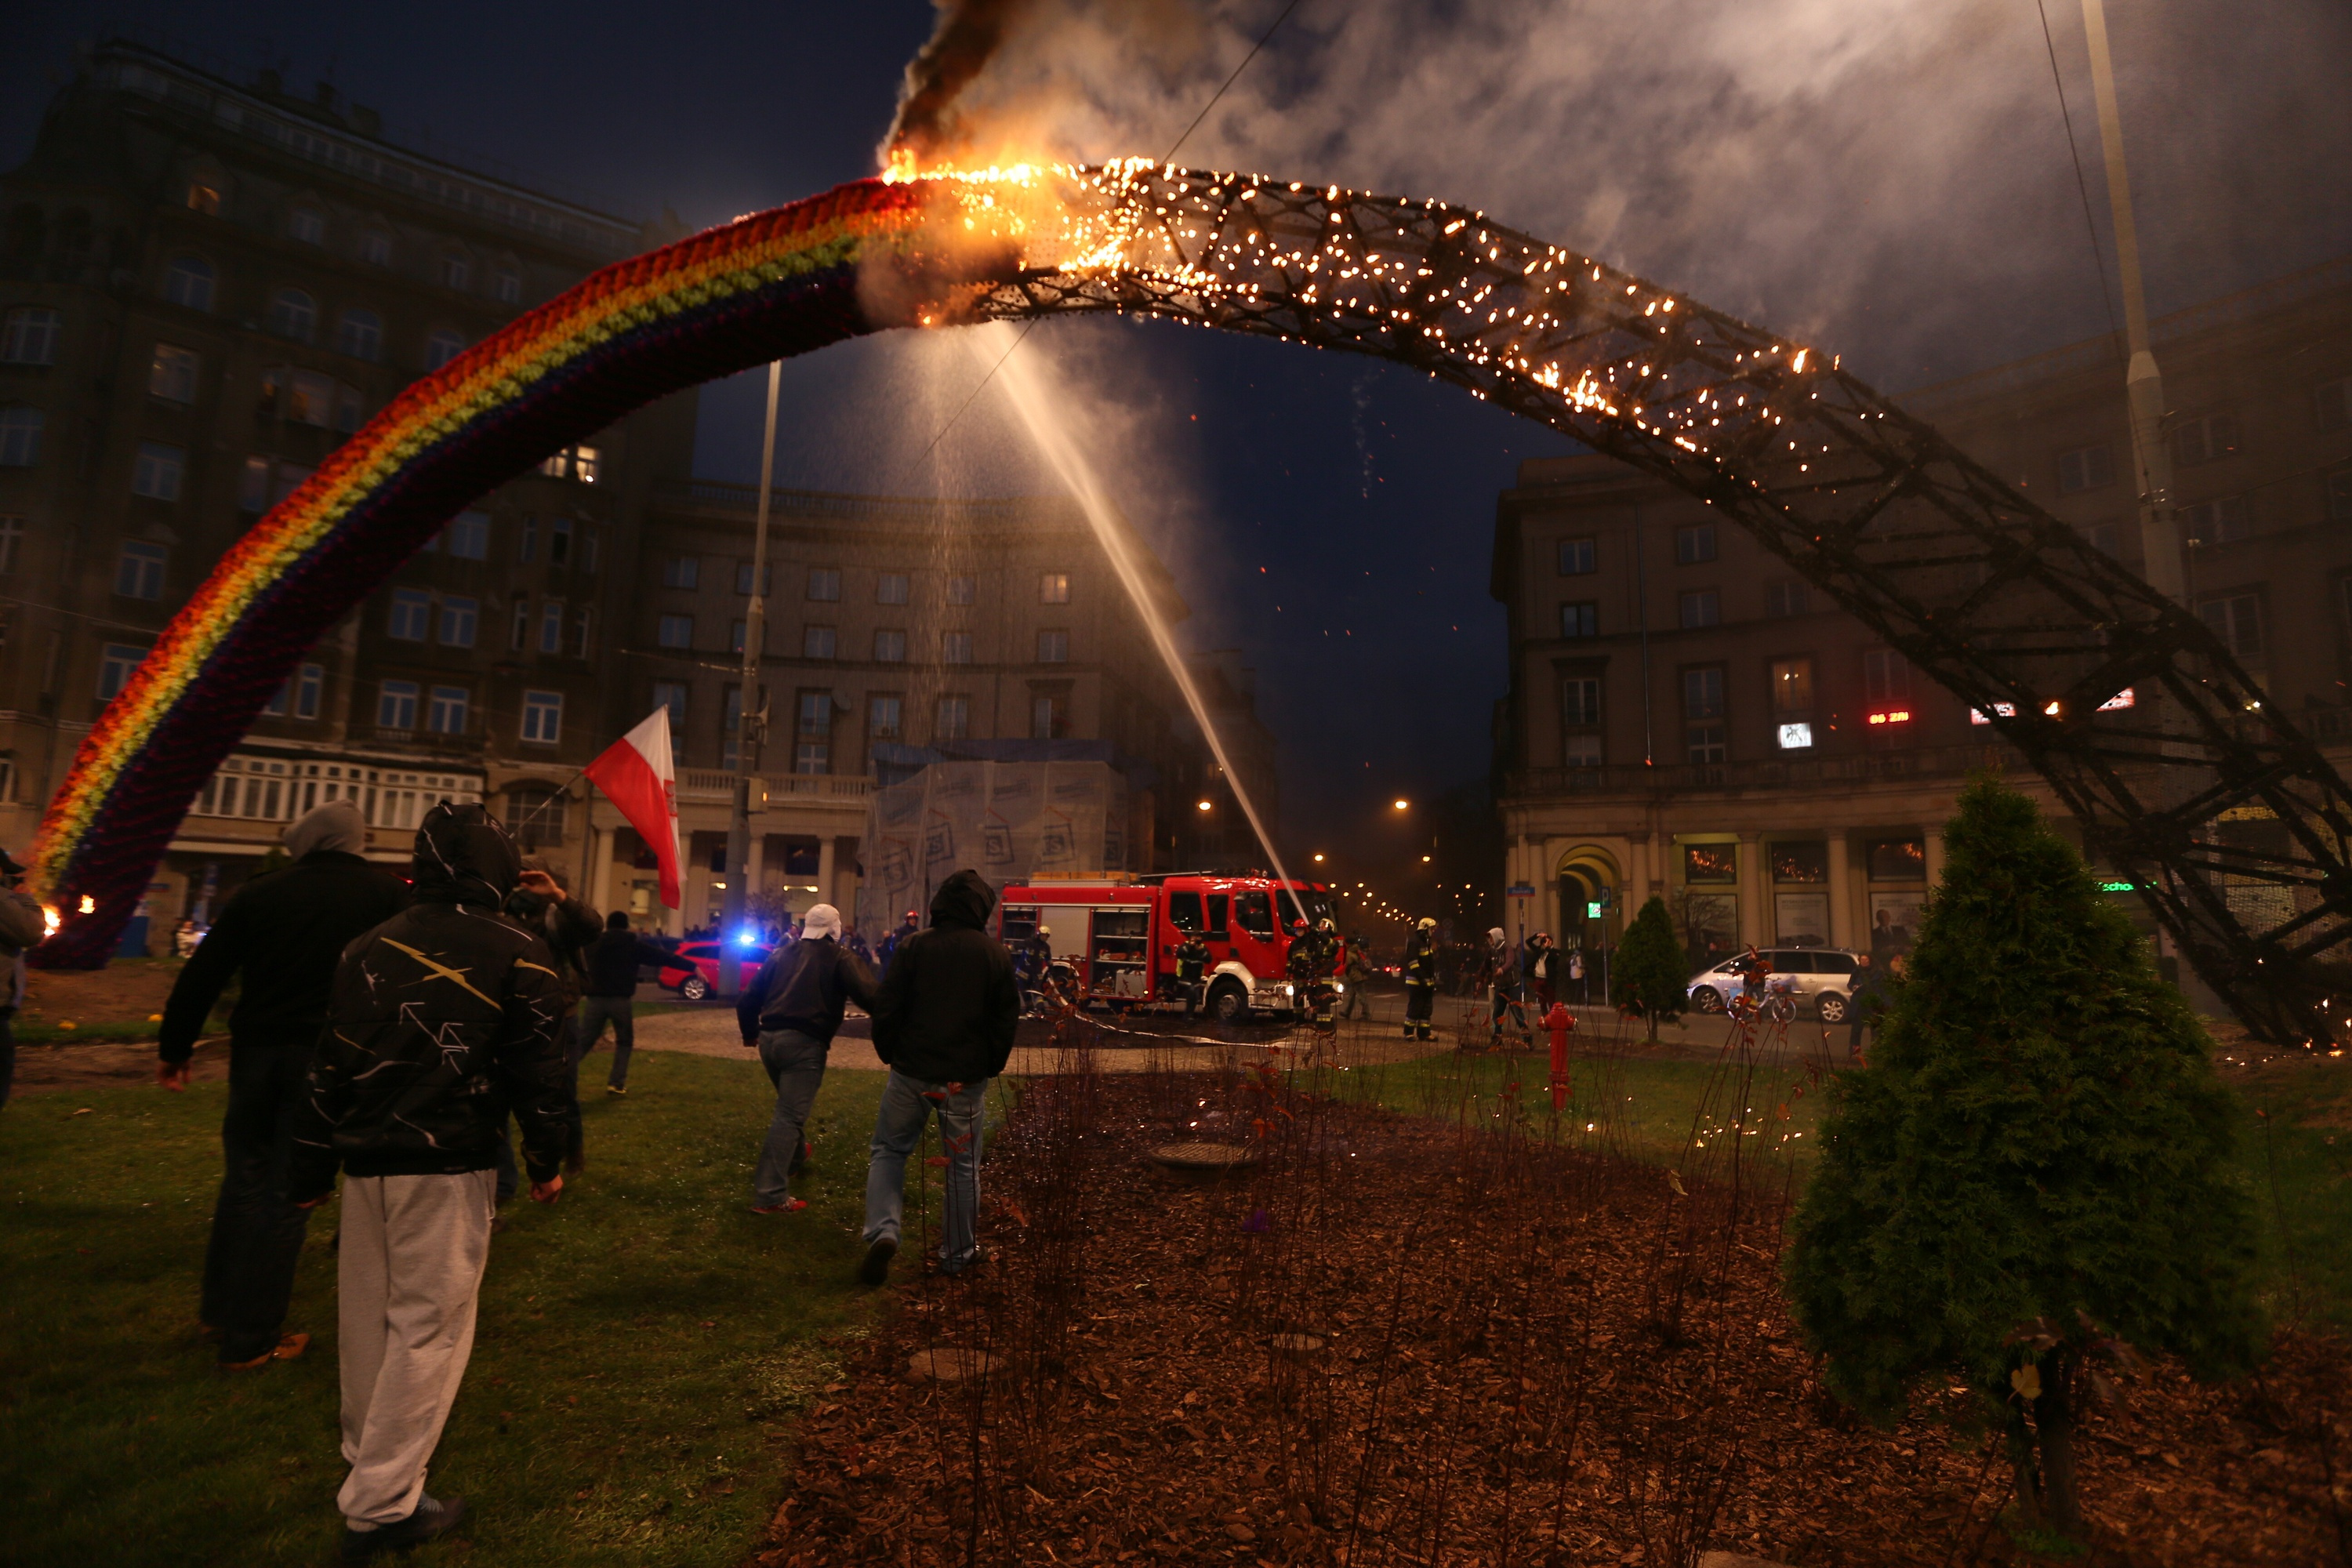 A 'Rainbow' installation is set on fire by demonstrators during the 'March of Independence' at the Savior Square in Warsaw, Poland, Nov. 11, 2013 (Jan A. Nicolas—picture-alliance/dpa/AP)